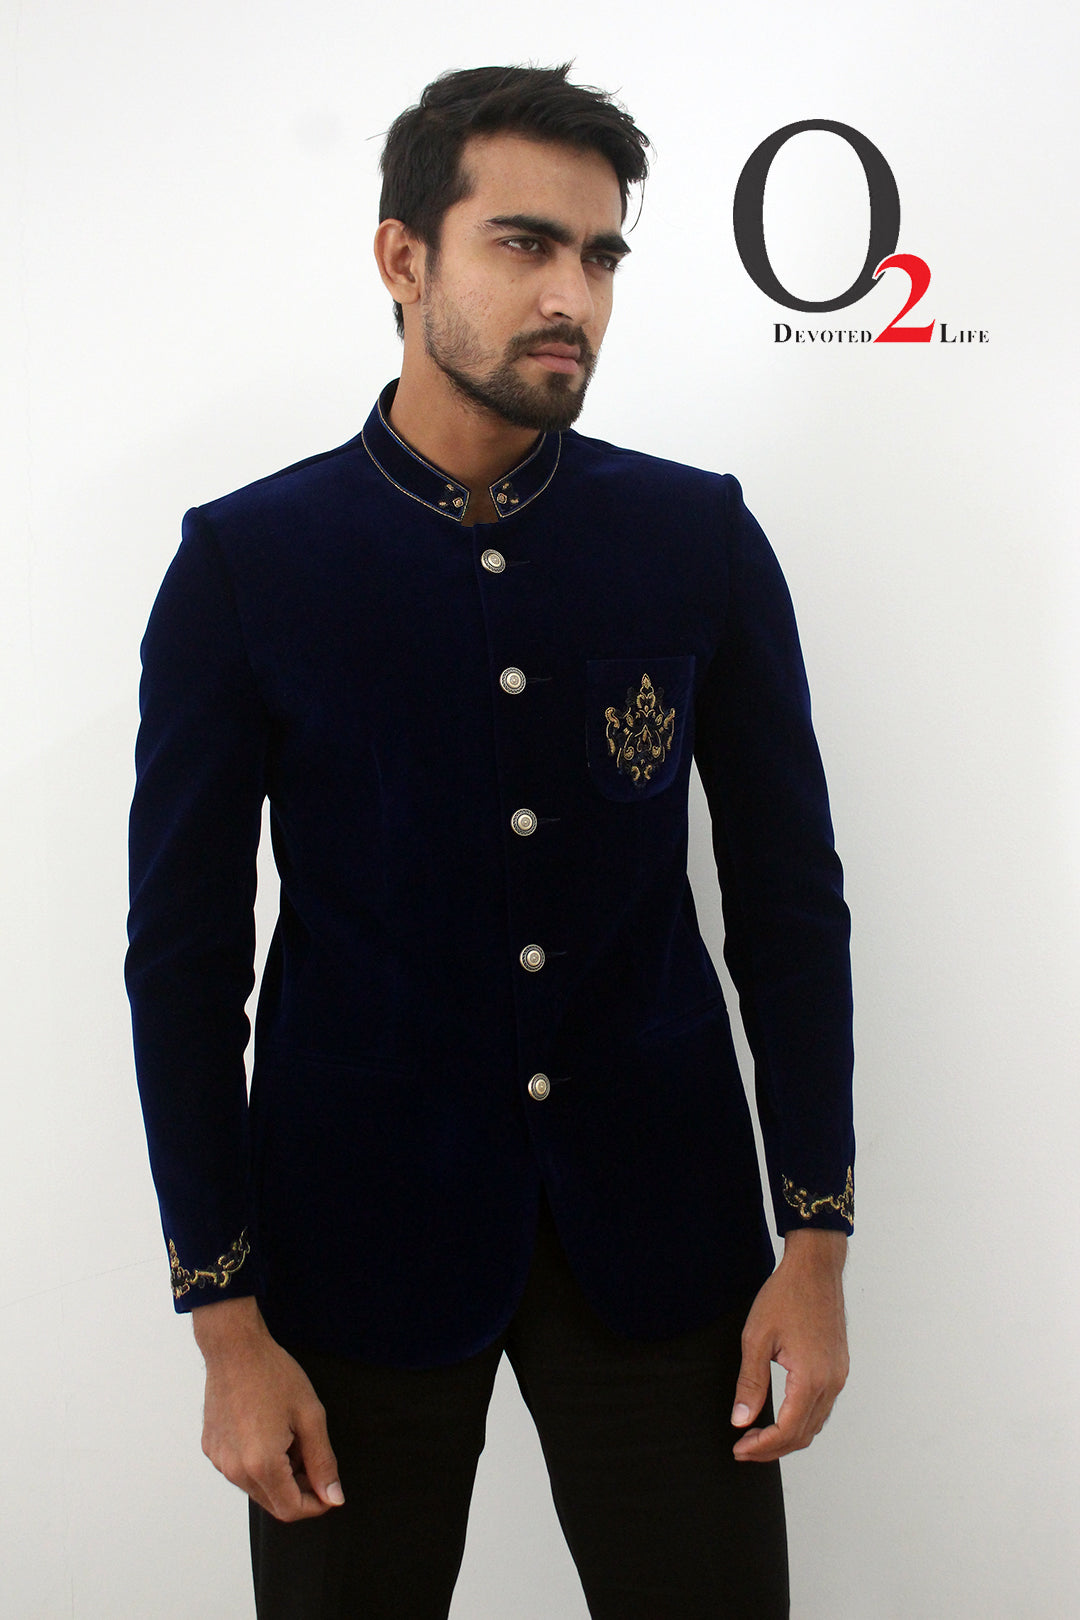 Prince coat for groom with full ebmroidered work